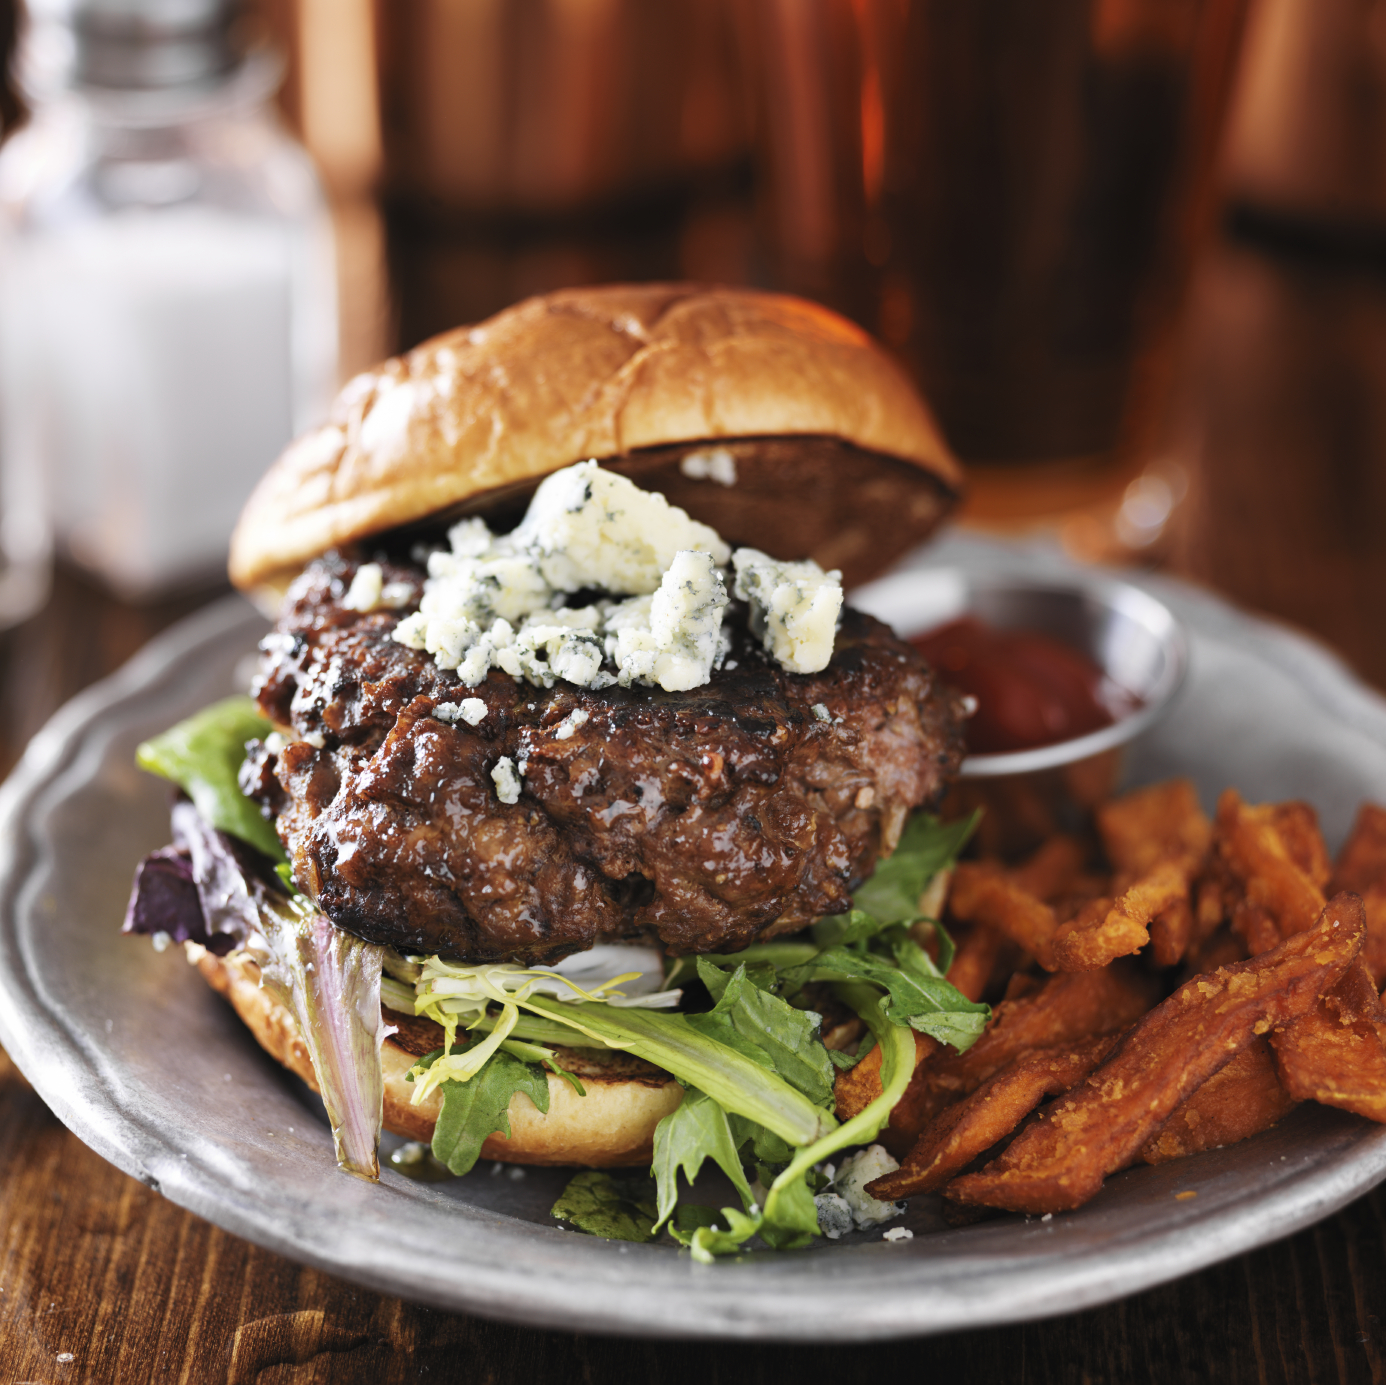 gourmet burger with blue cheese and sweet potato fries